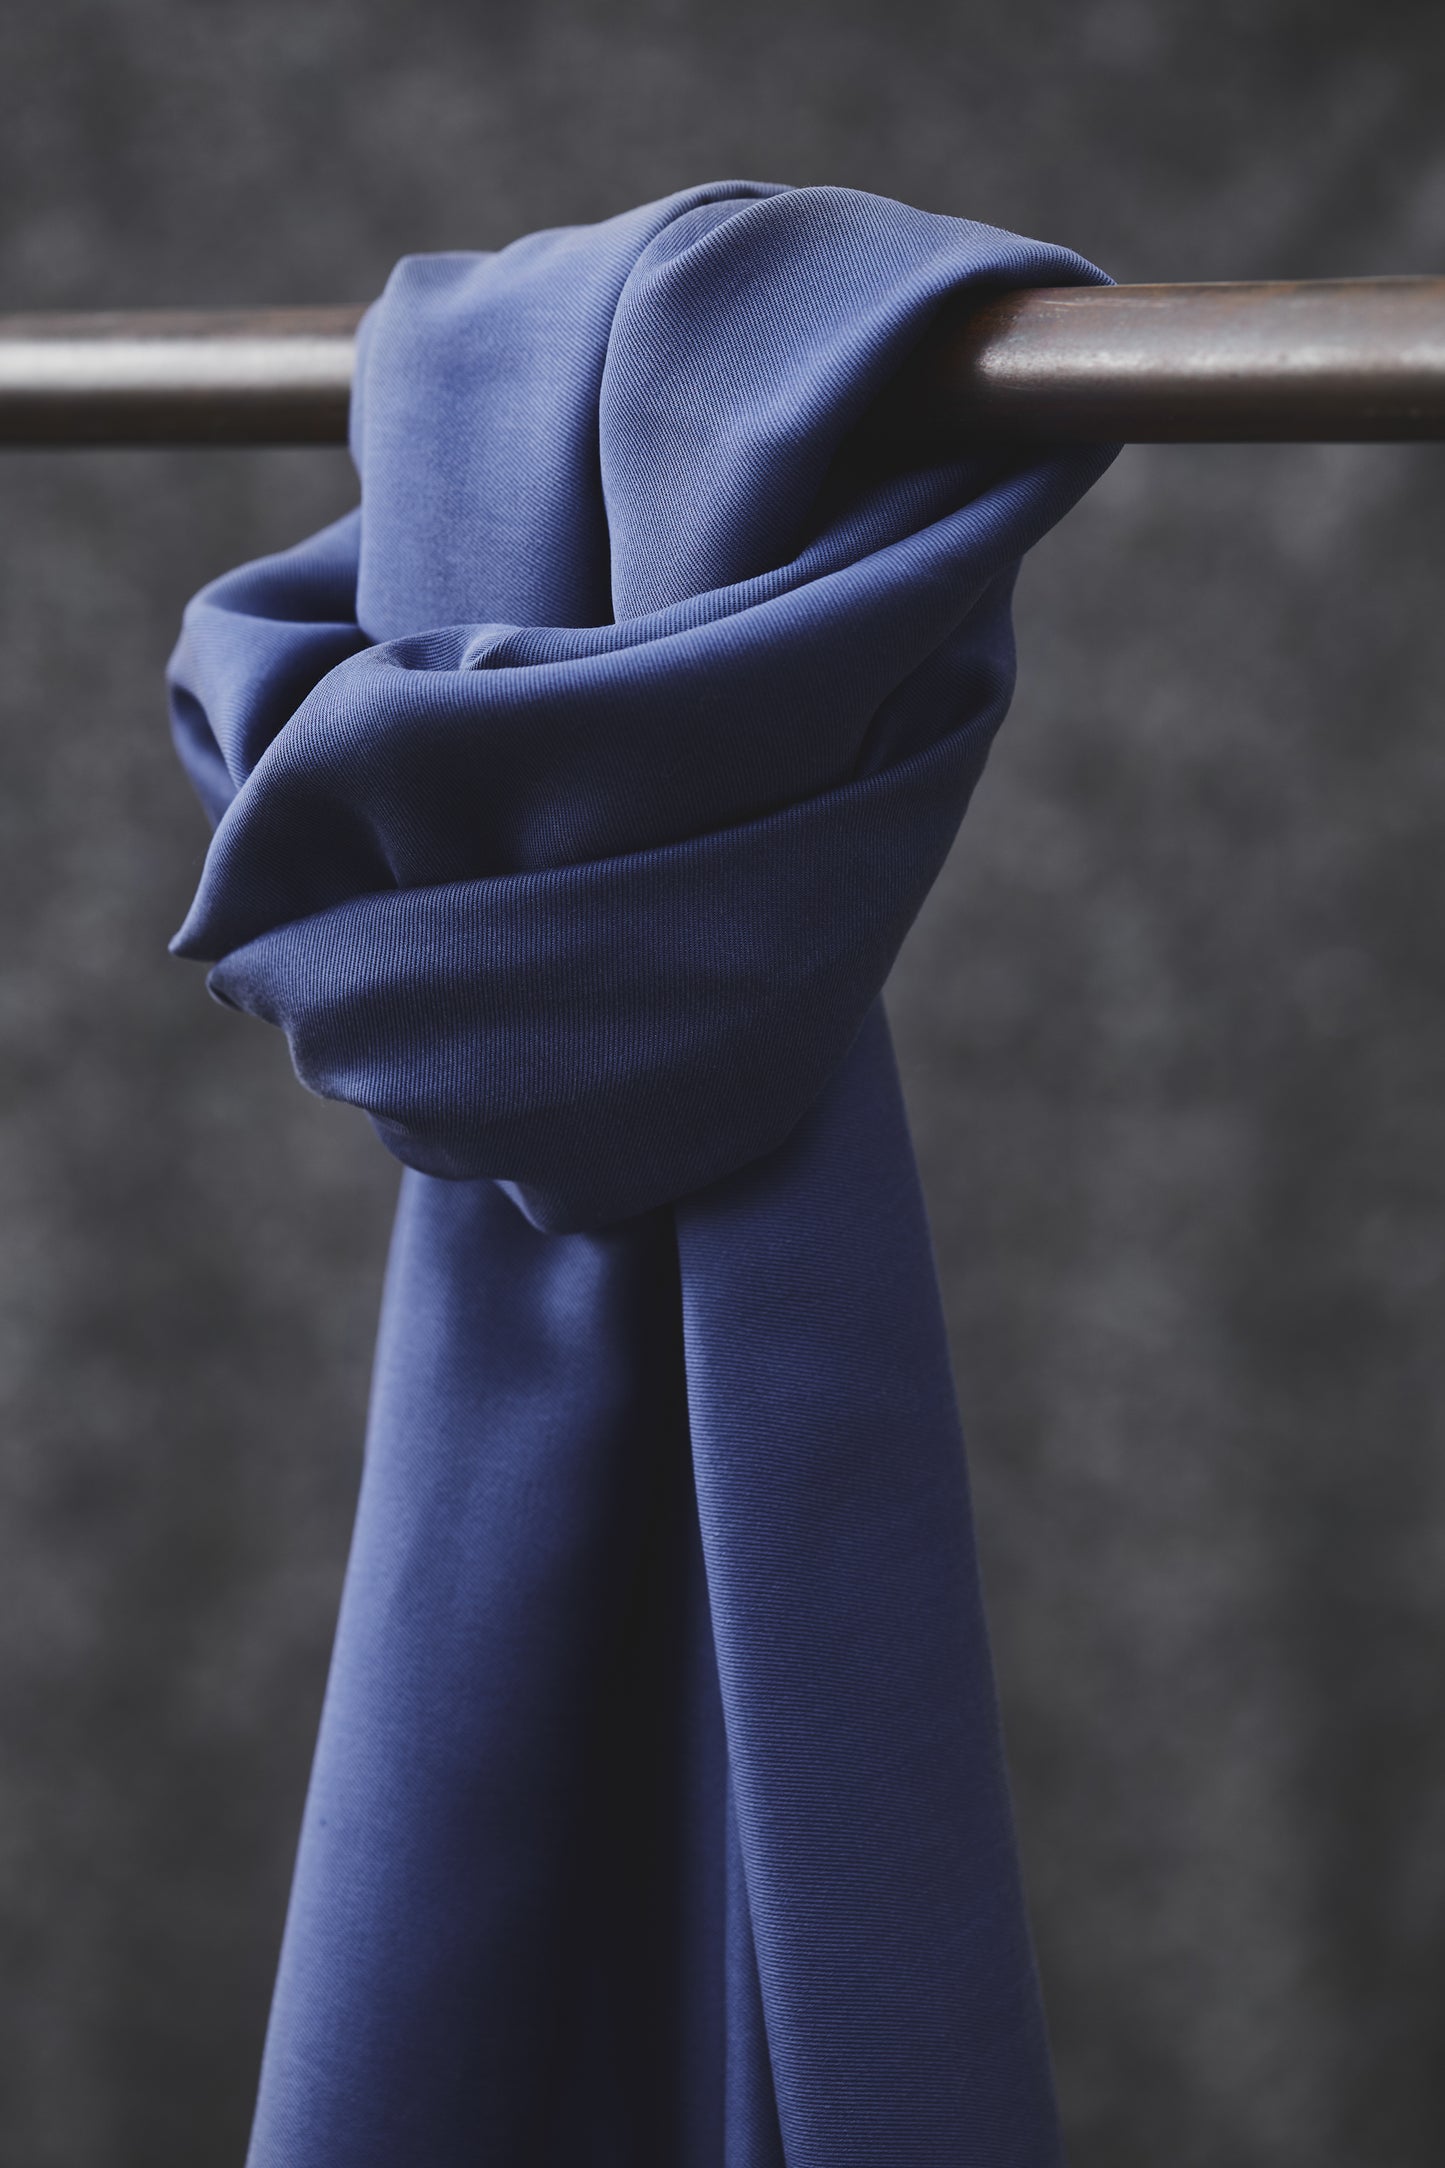 Smooth drape twill tencel sewing fabric in lapis, knotted over clothes rail